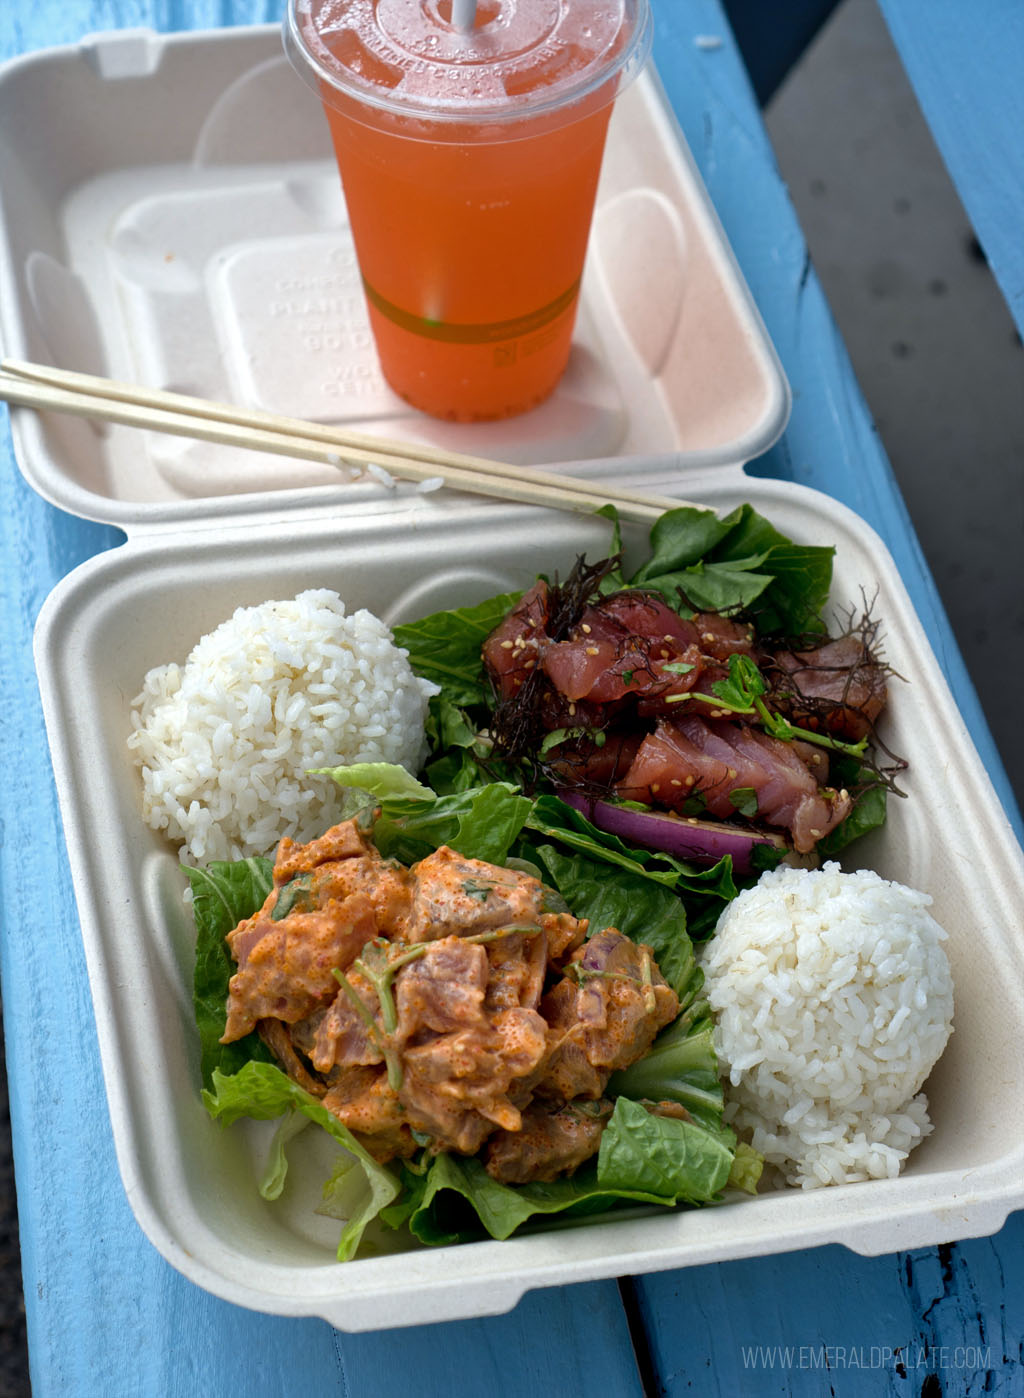 takeout container of poke and fresh juice from a spot where locals eat in Maui